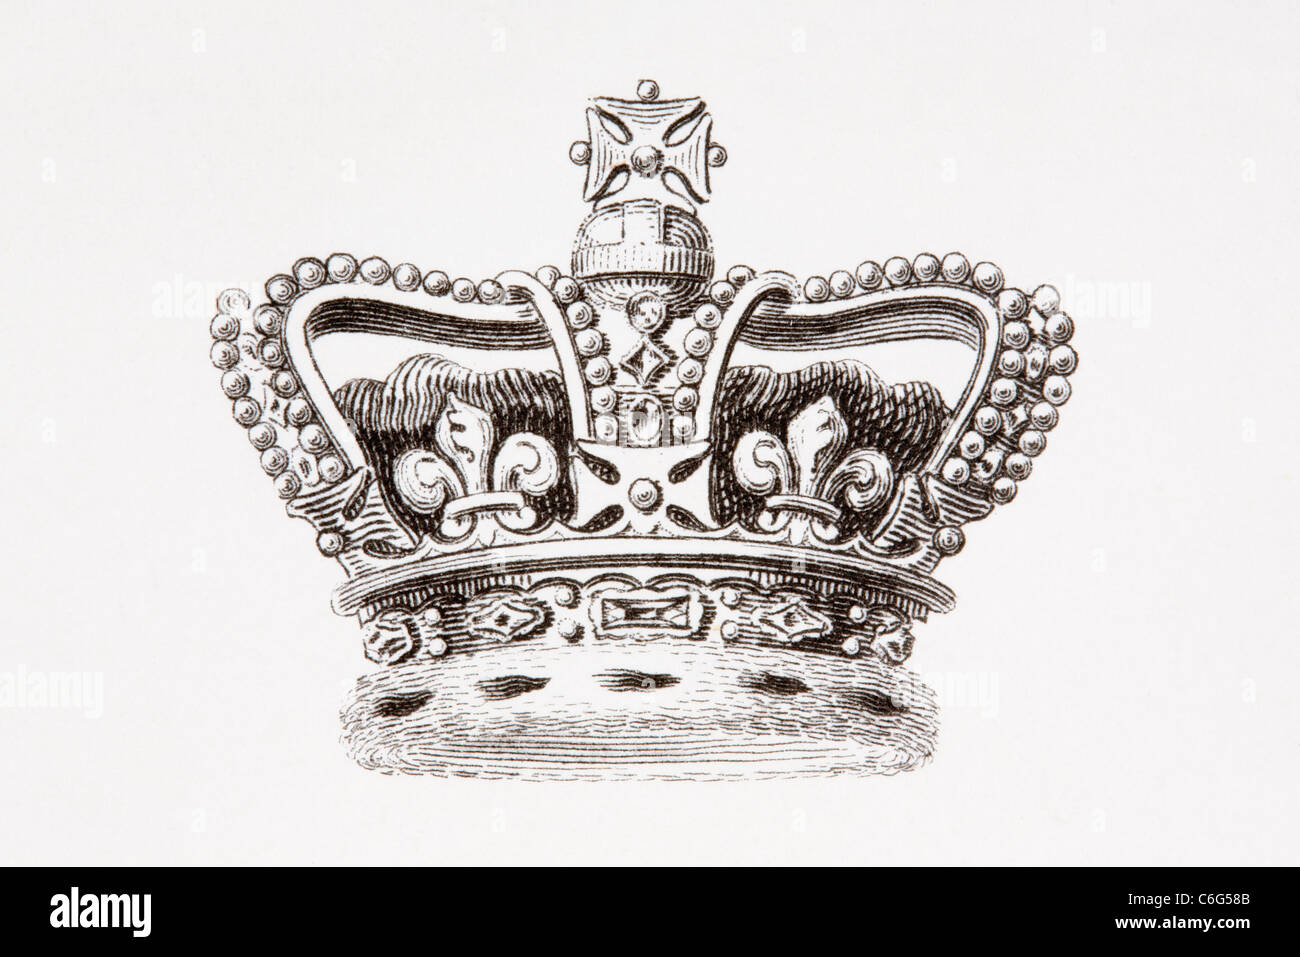 The Crown of England. Stock Photo